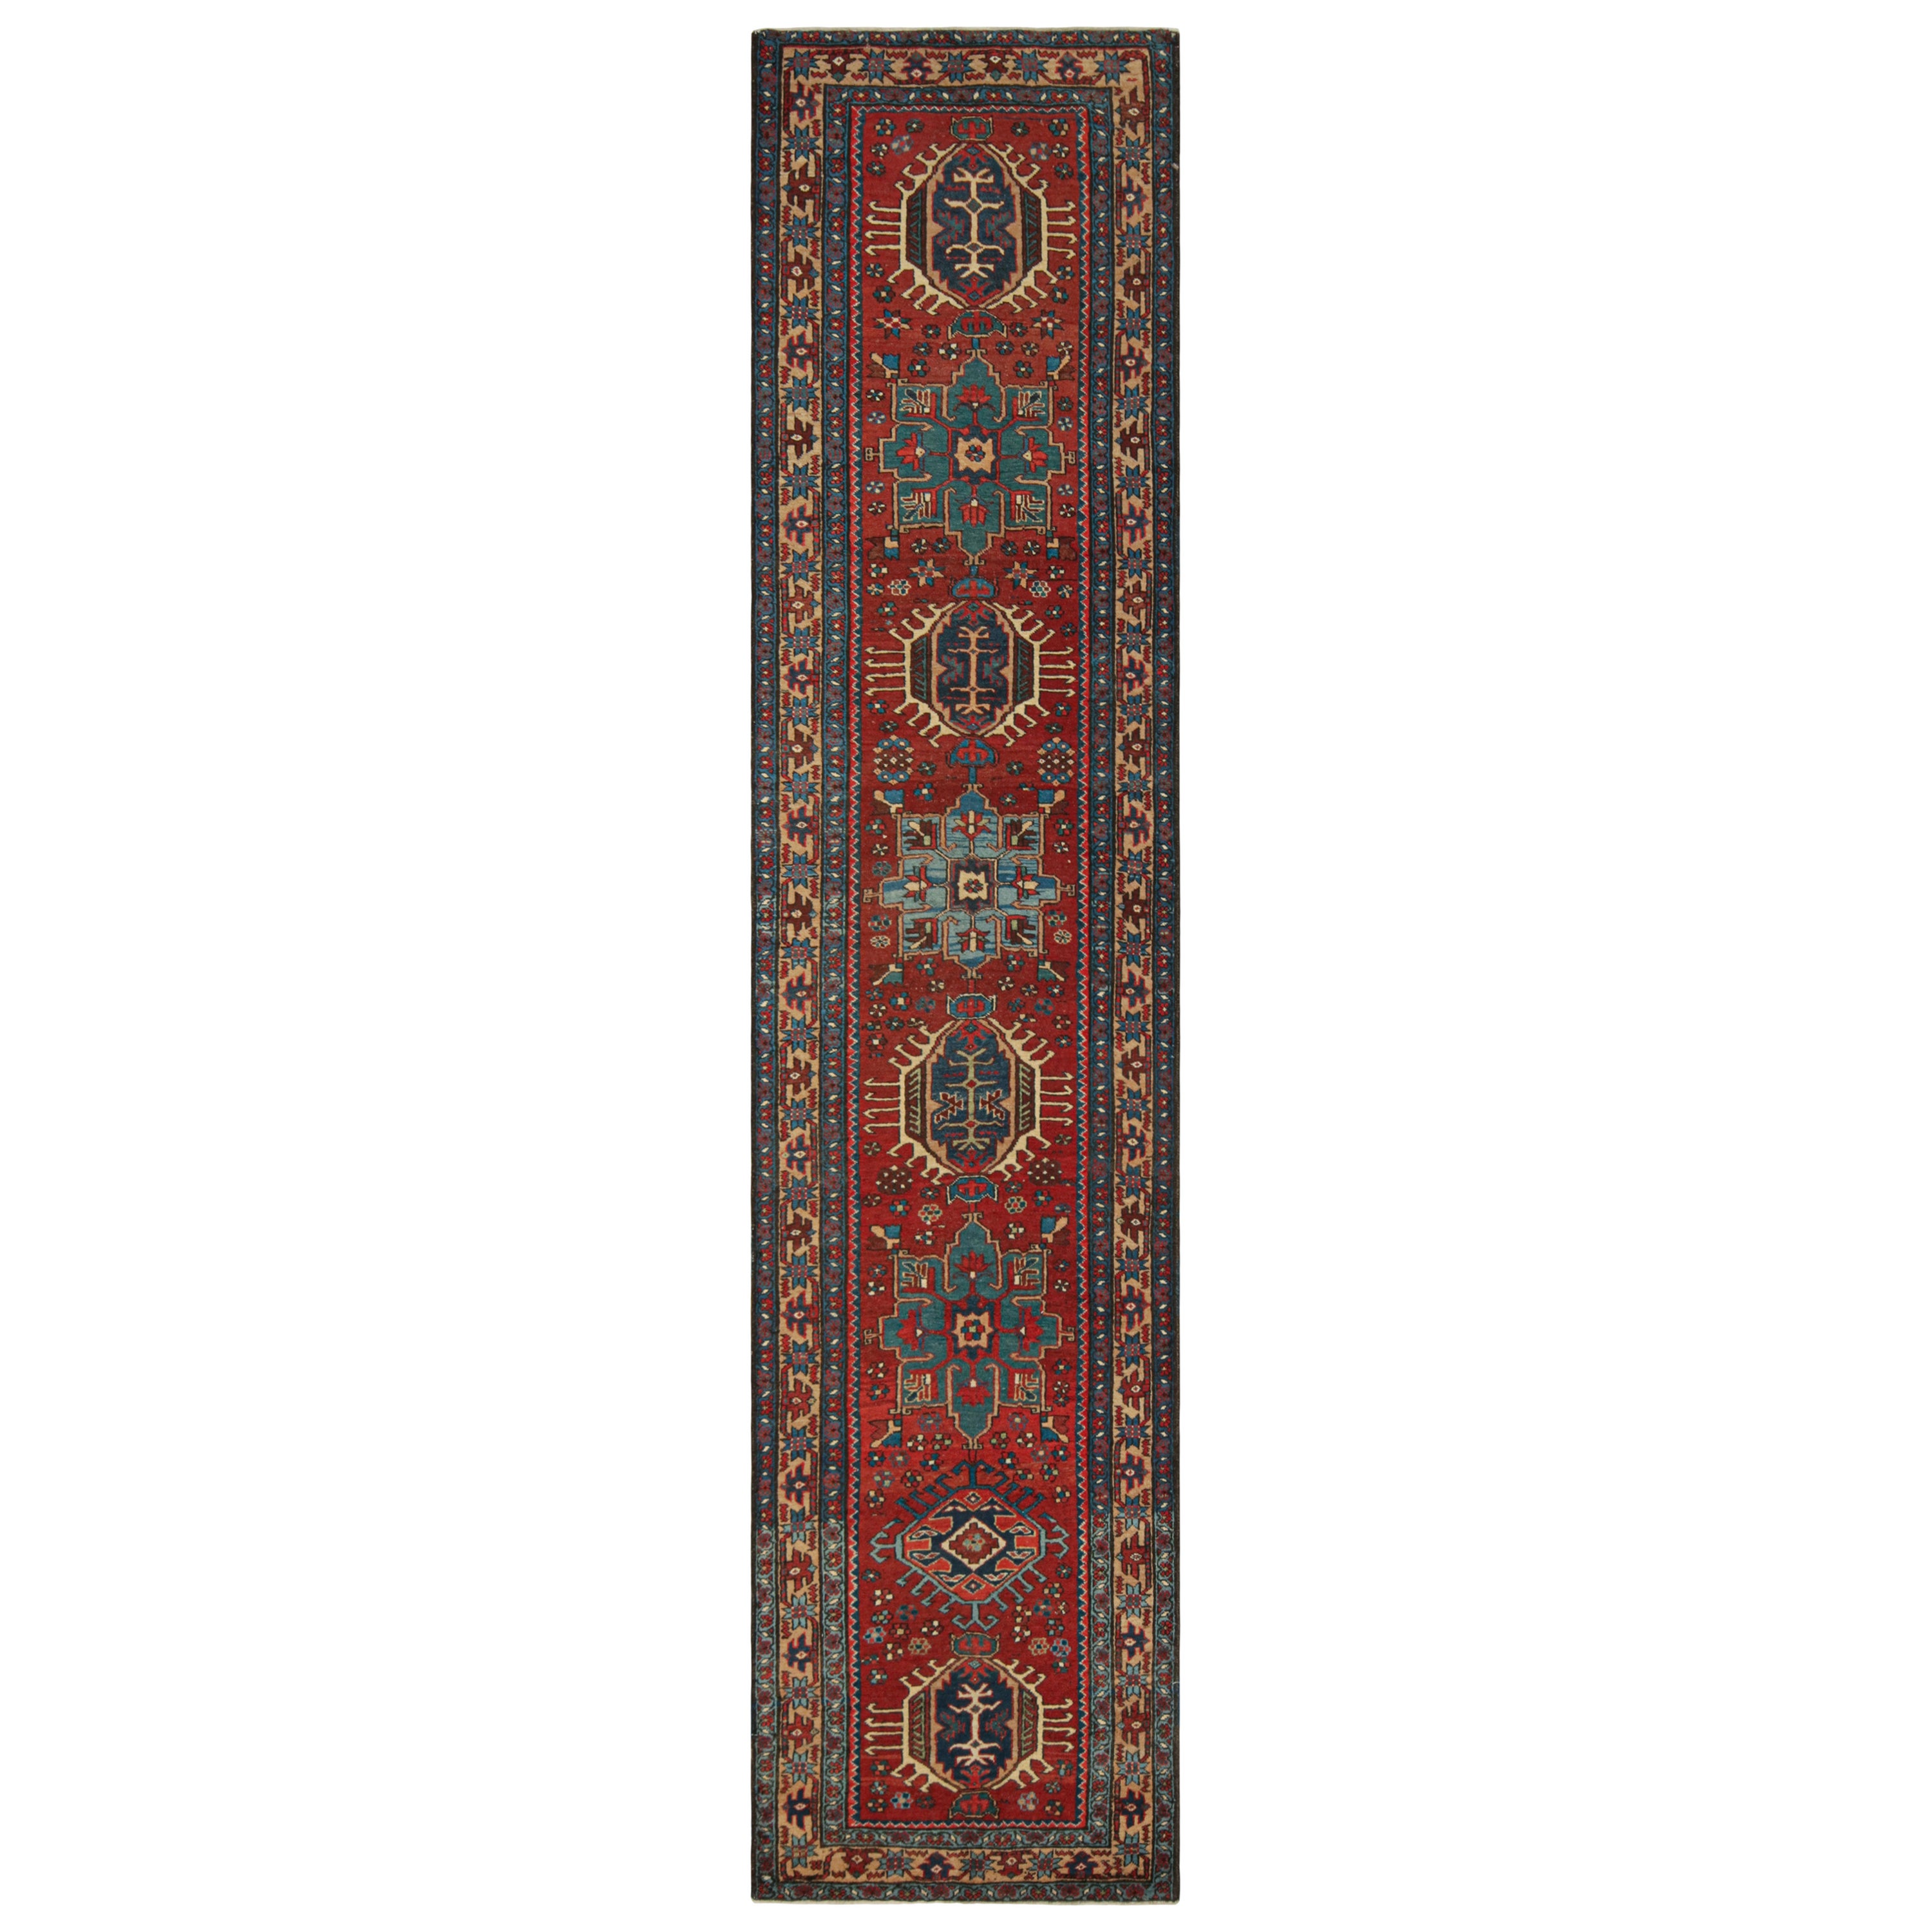 Antique Arraiolos Needlepoint Runner with Floral Medallions, from Rug & Kilim